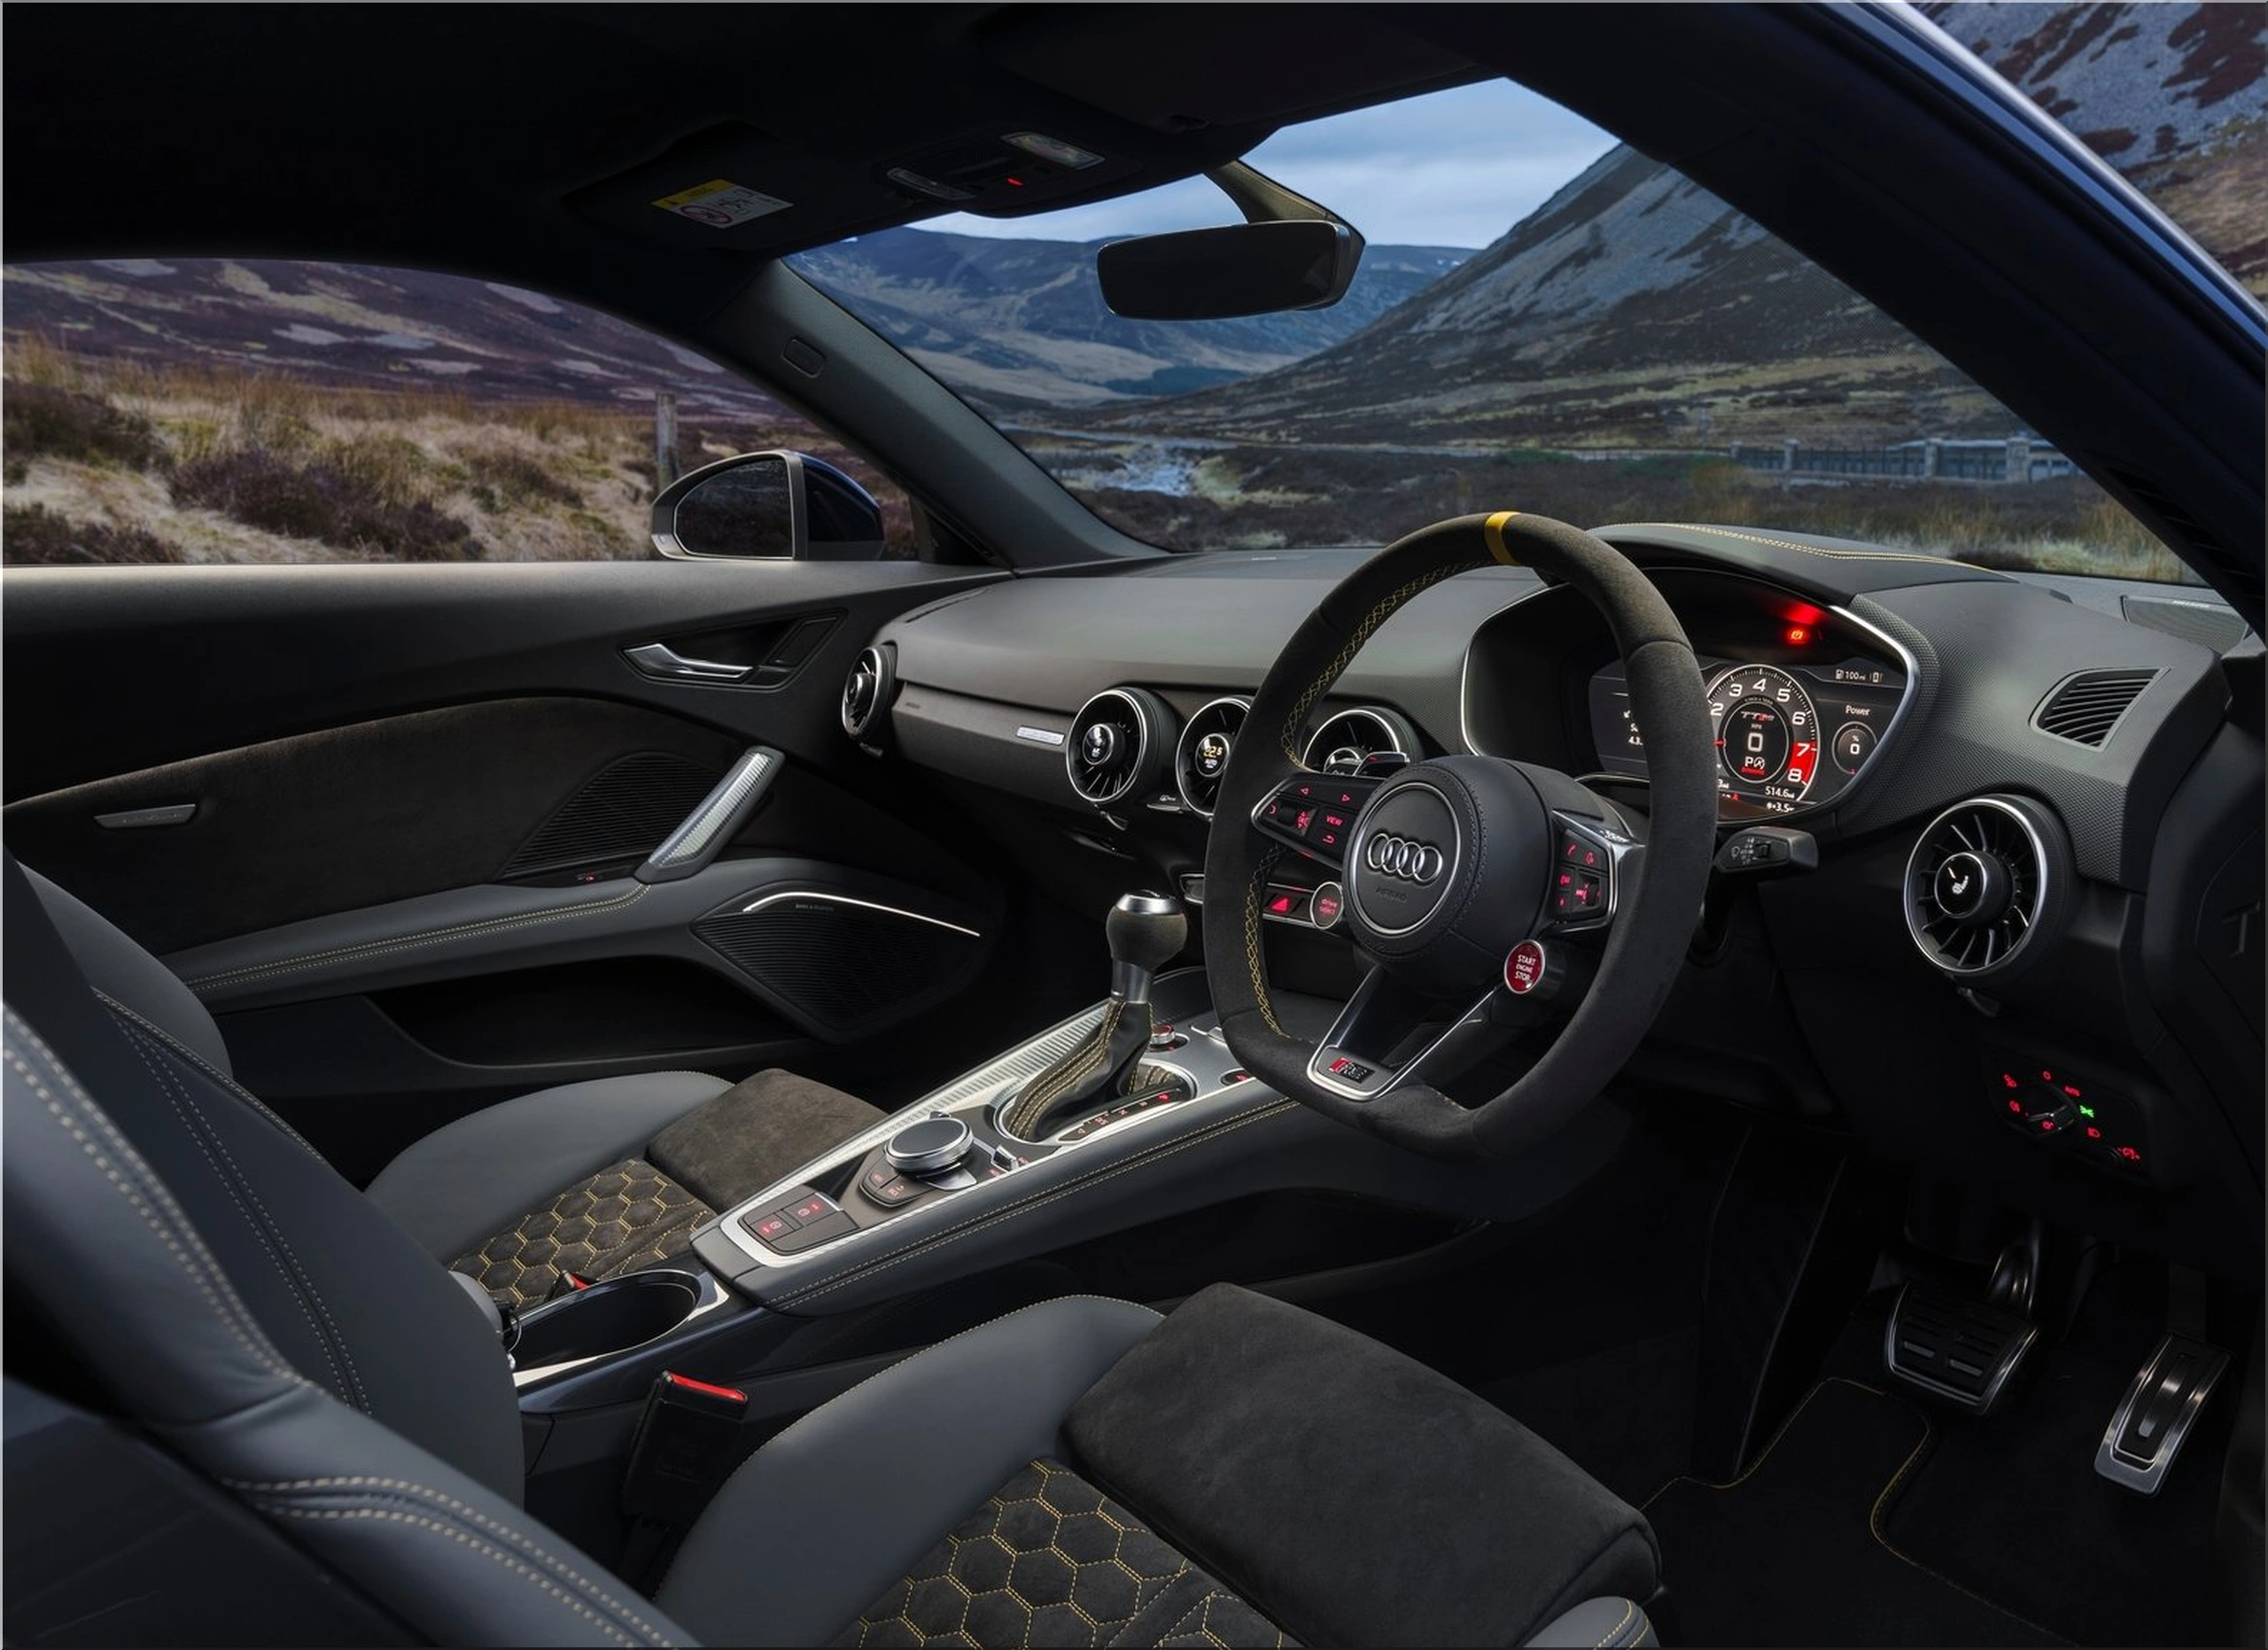 Audi TT Coupe images (6 of 8)